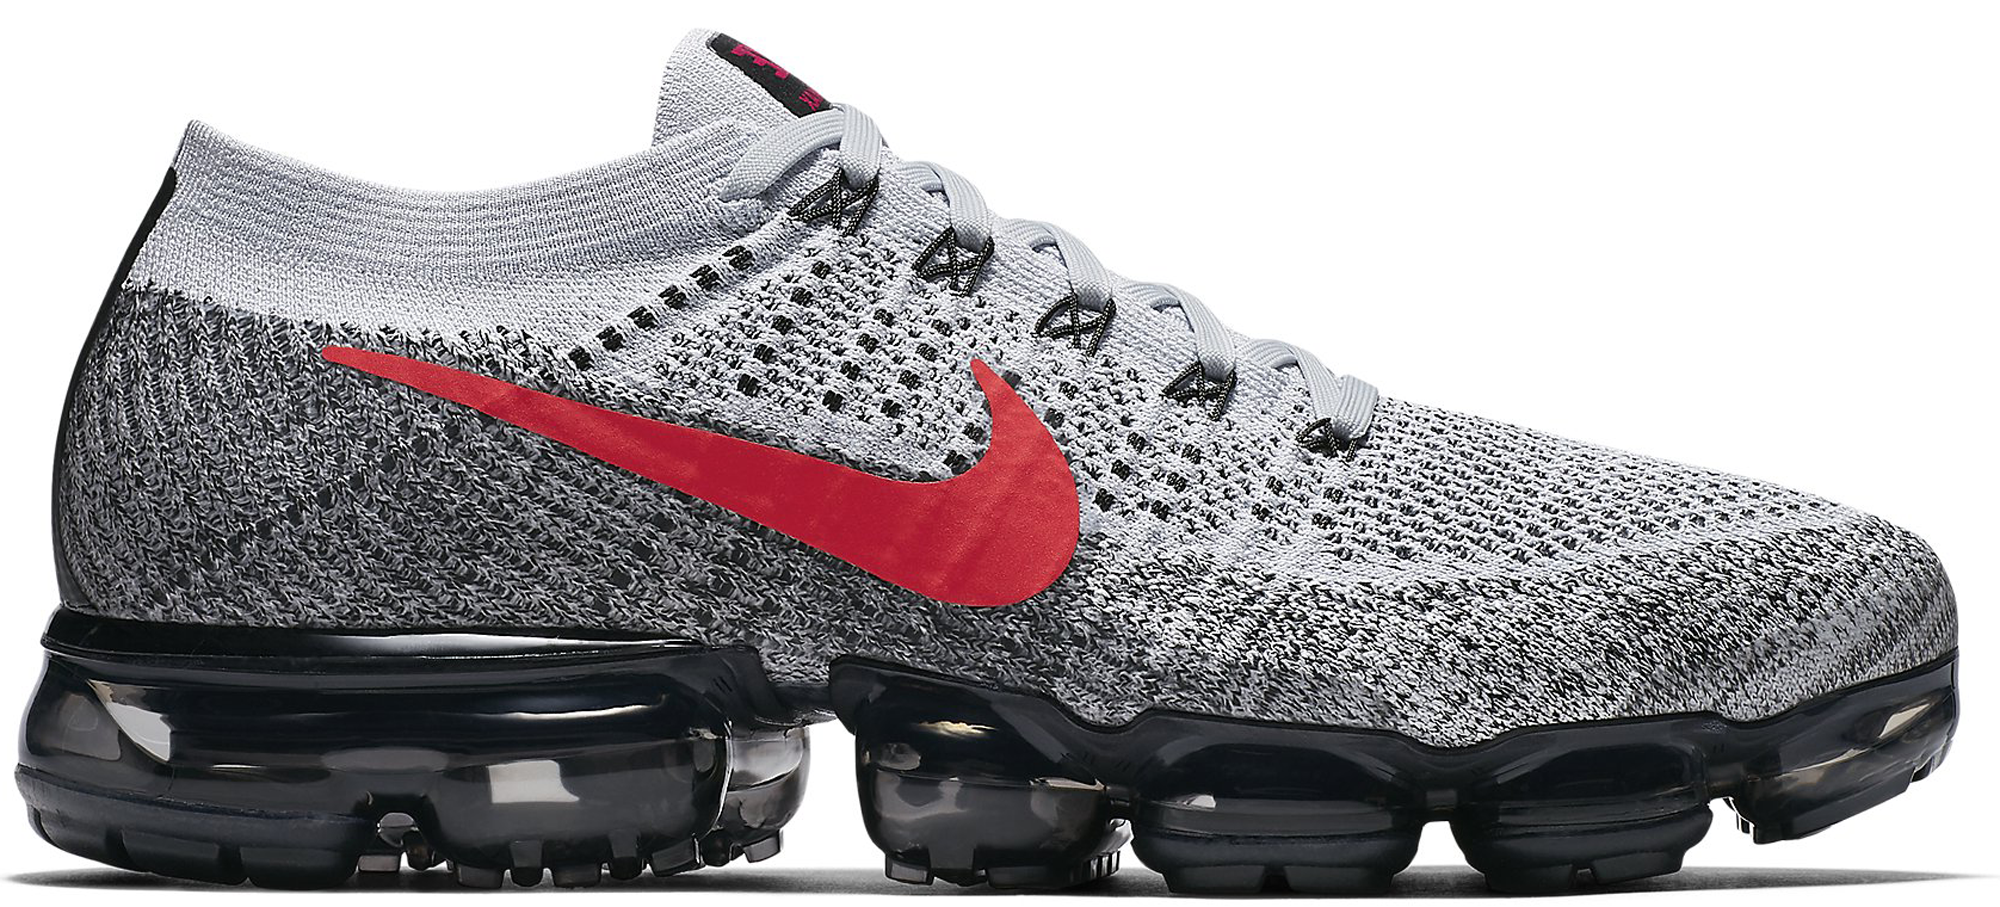 vapormax flyknit red and black